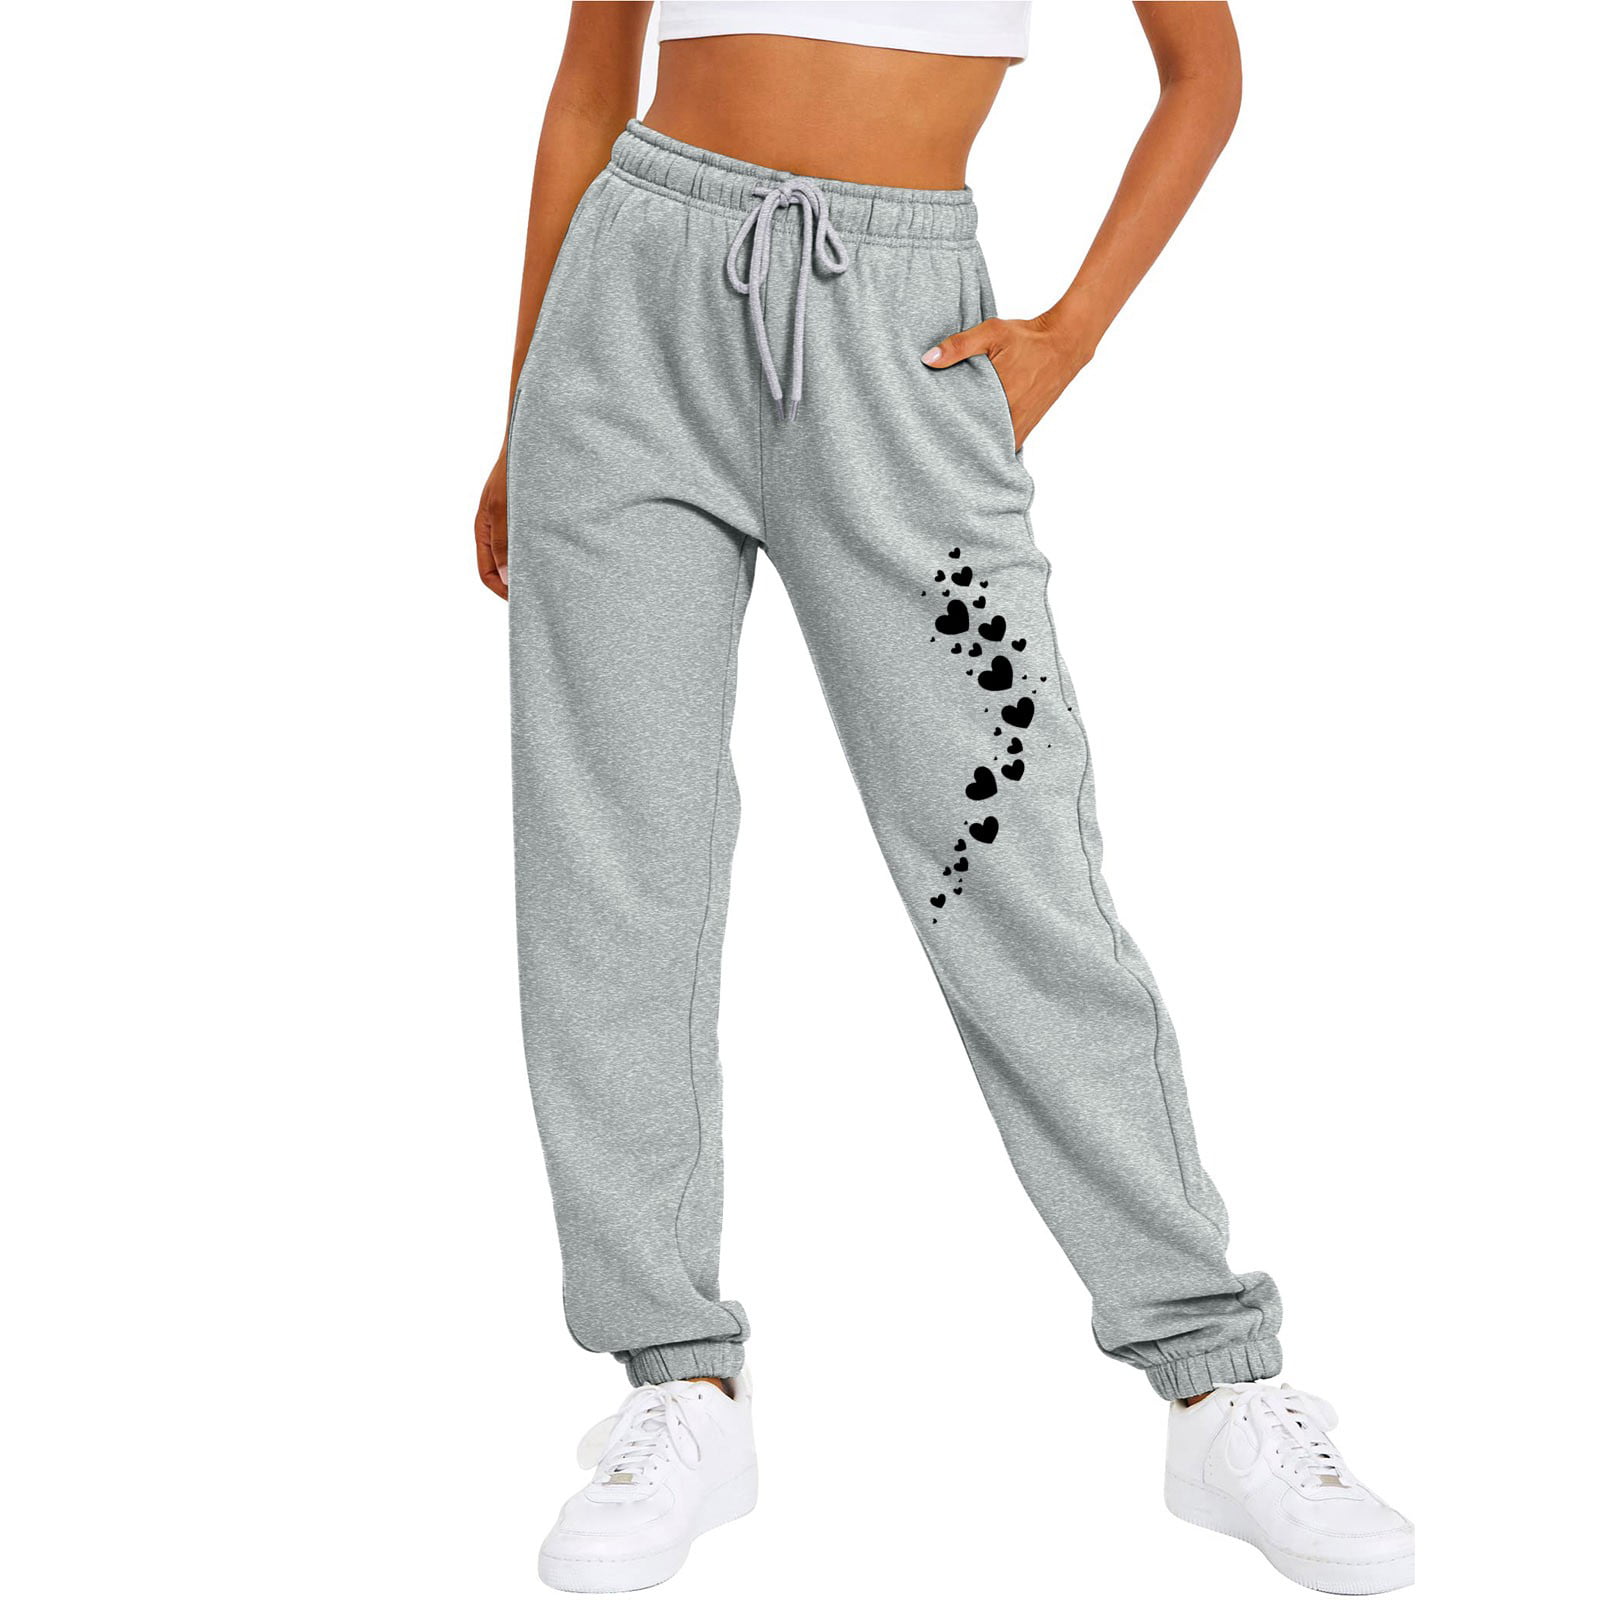 Womens Tracksuit Bottoms Elastic High Waist Joggers Pants with